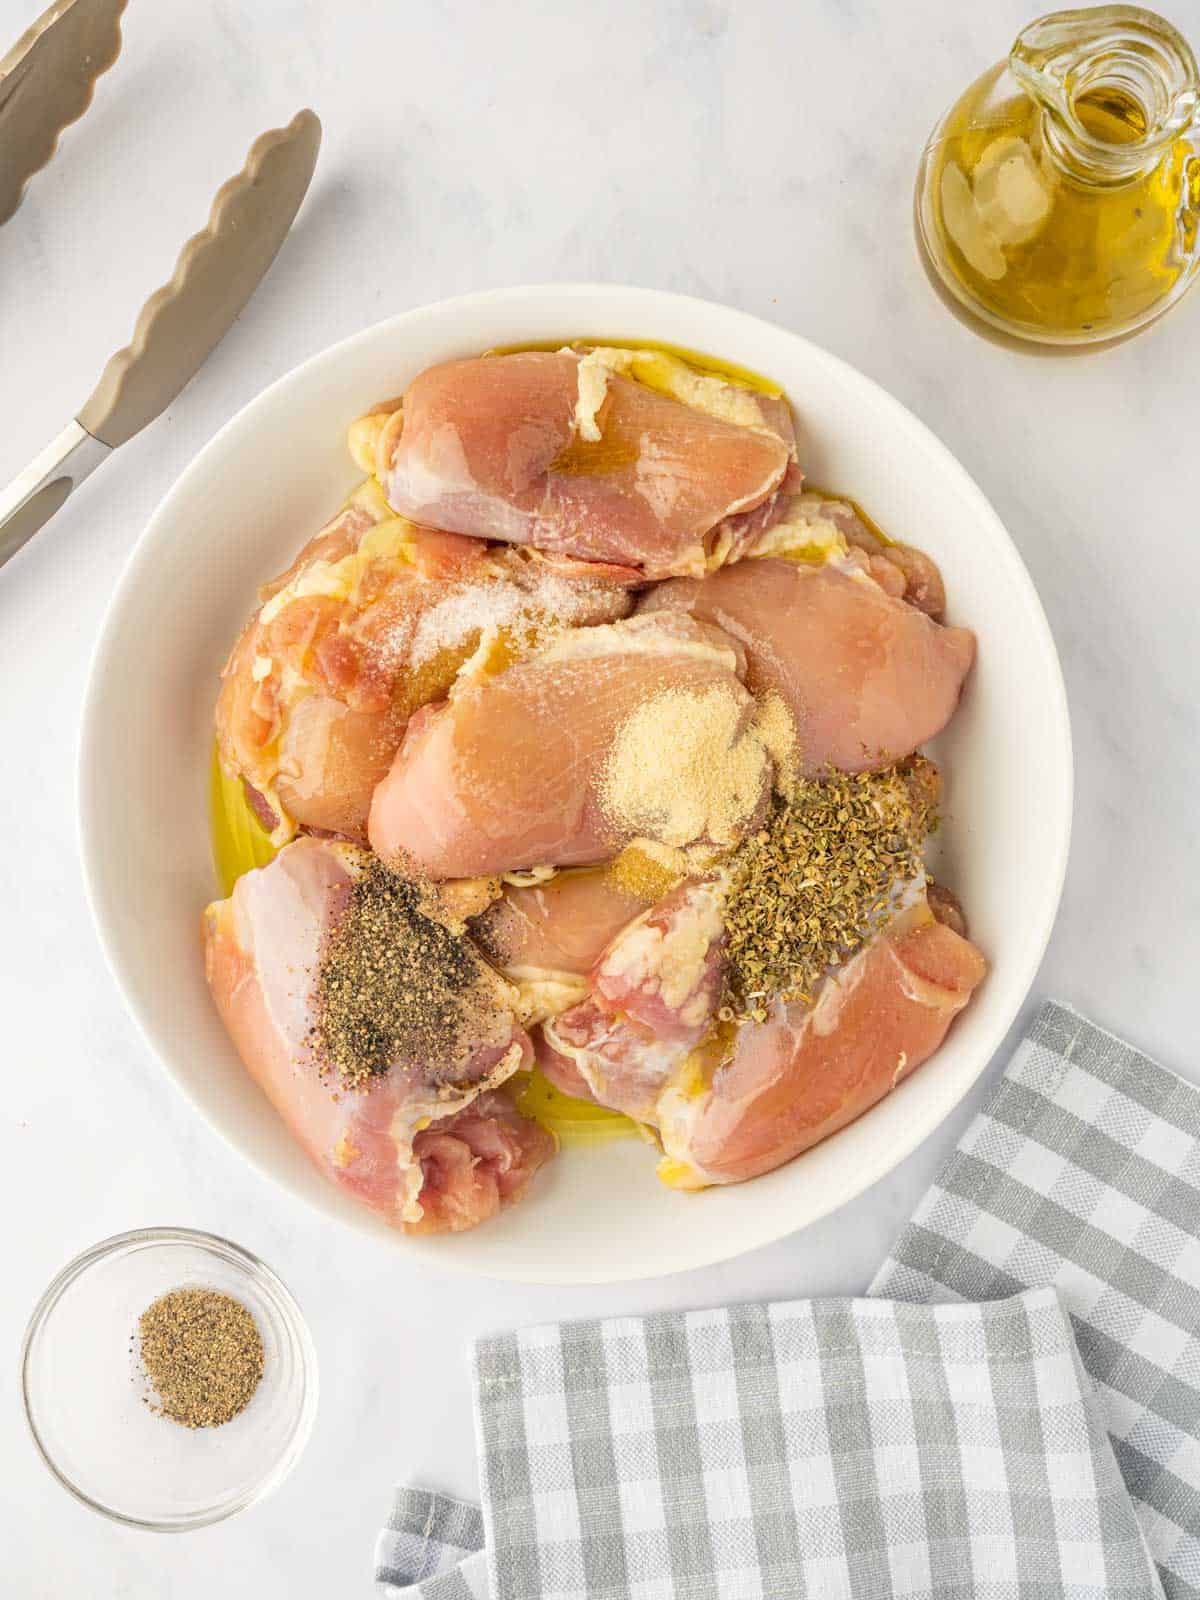 Raw chicken thighs are tossed with oil and seasoning in a bowl.